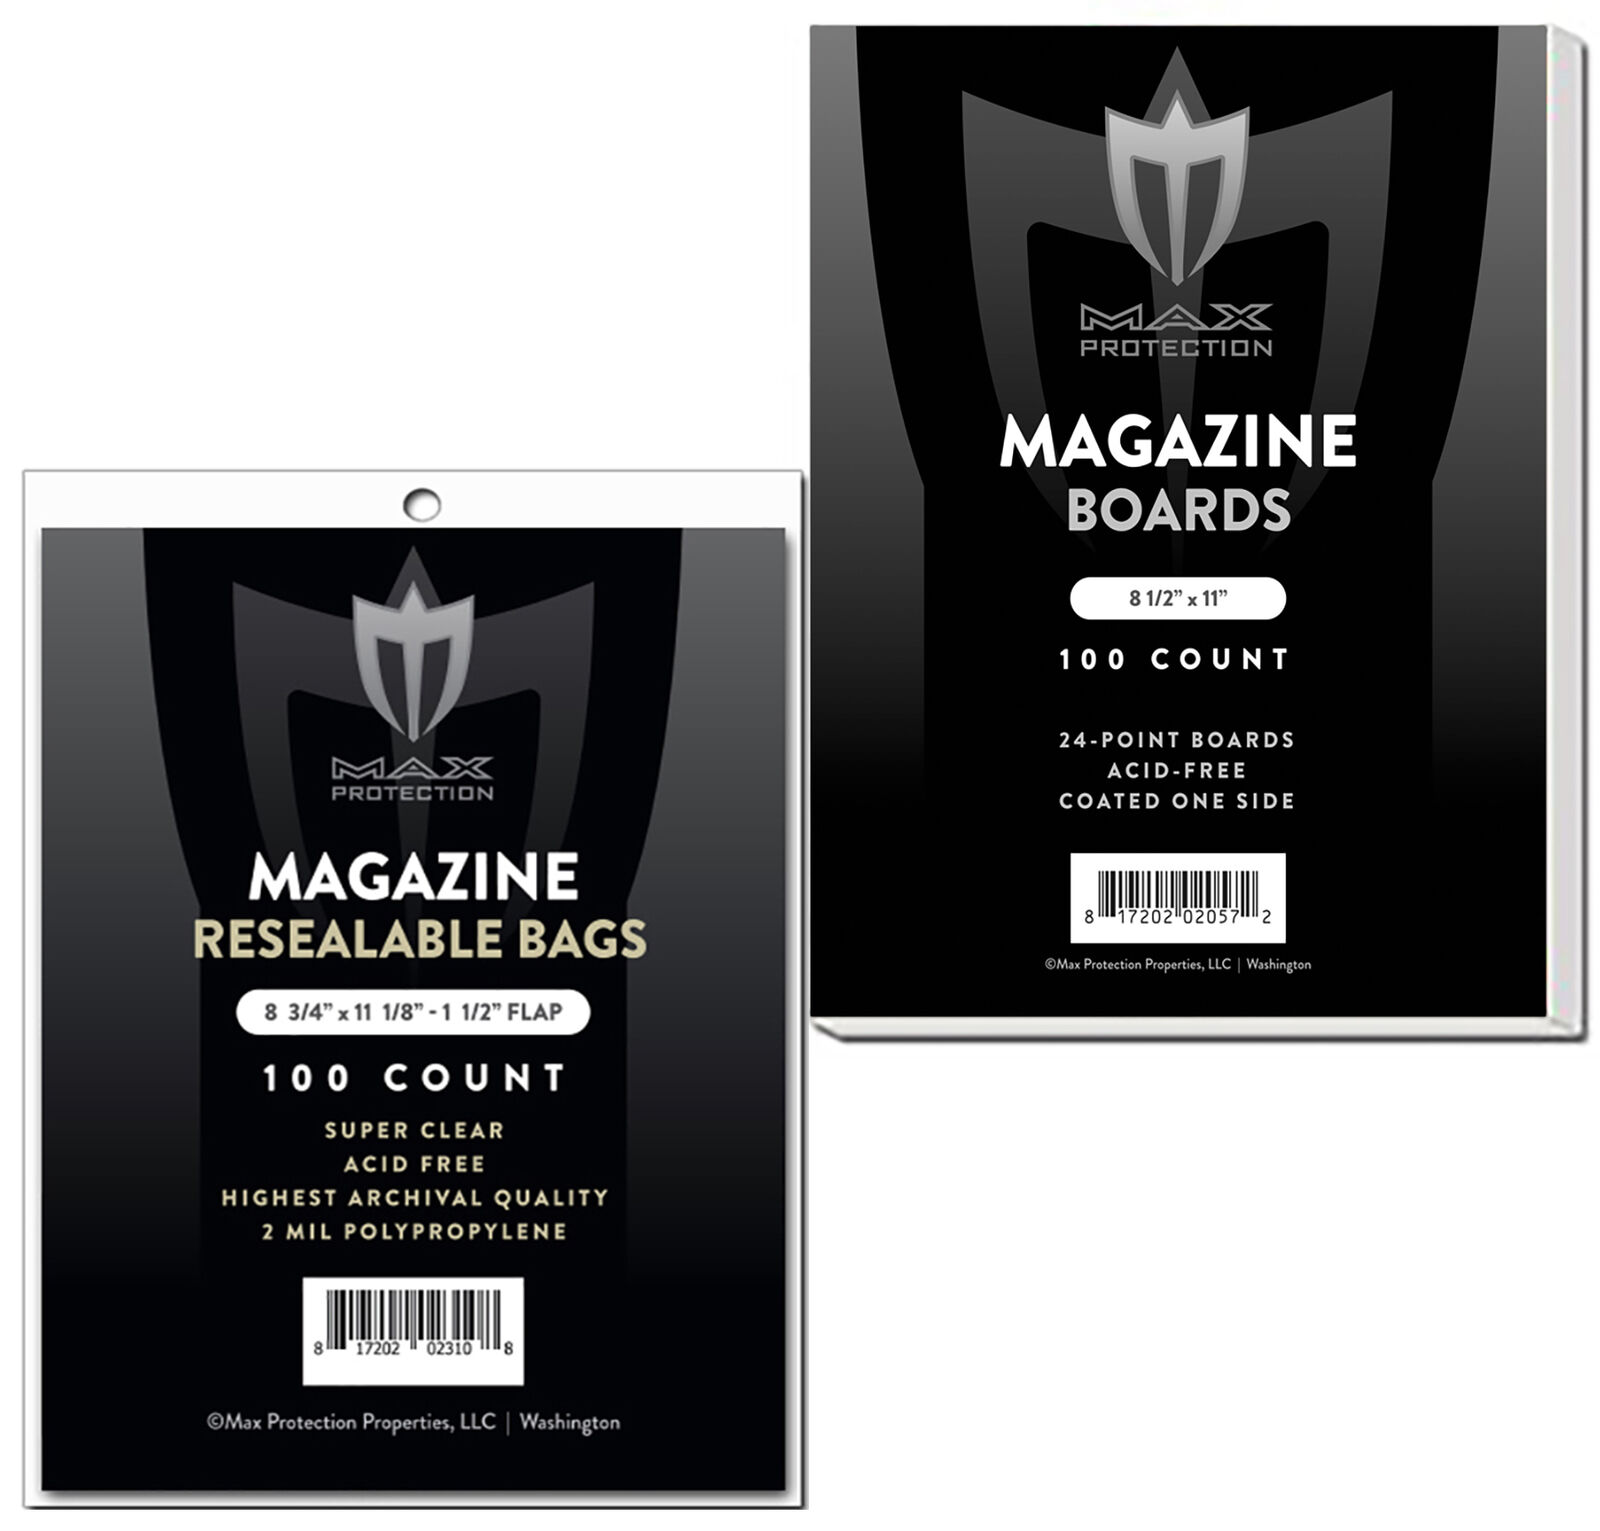 1000 Max Pro Ultra Clear Resealable Magazine Bags and Boards